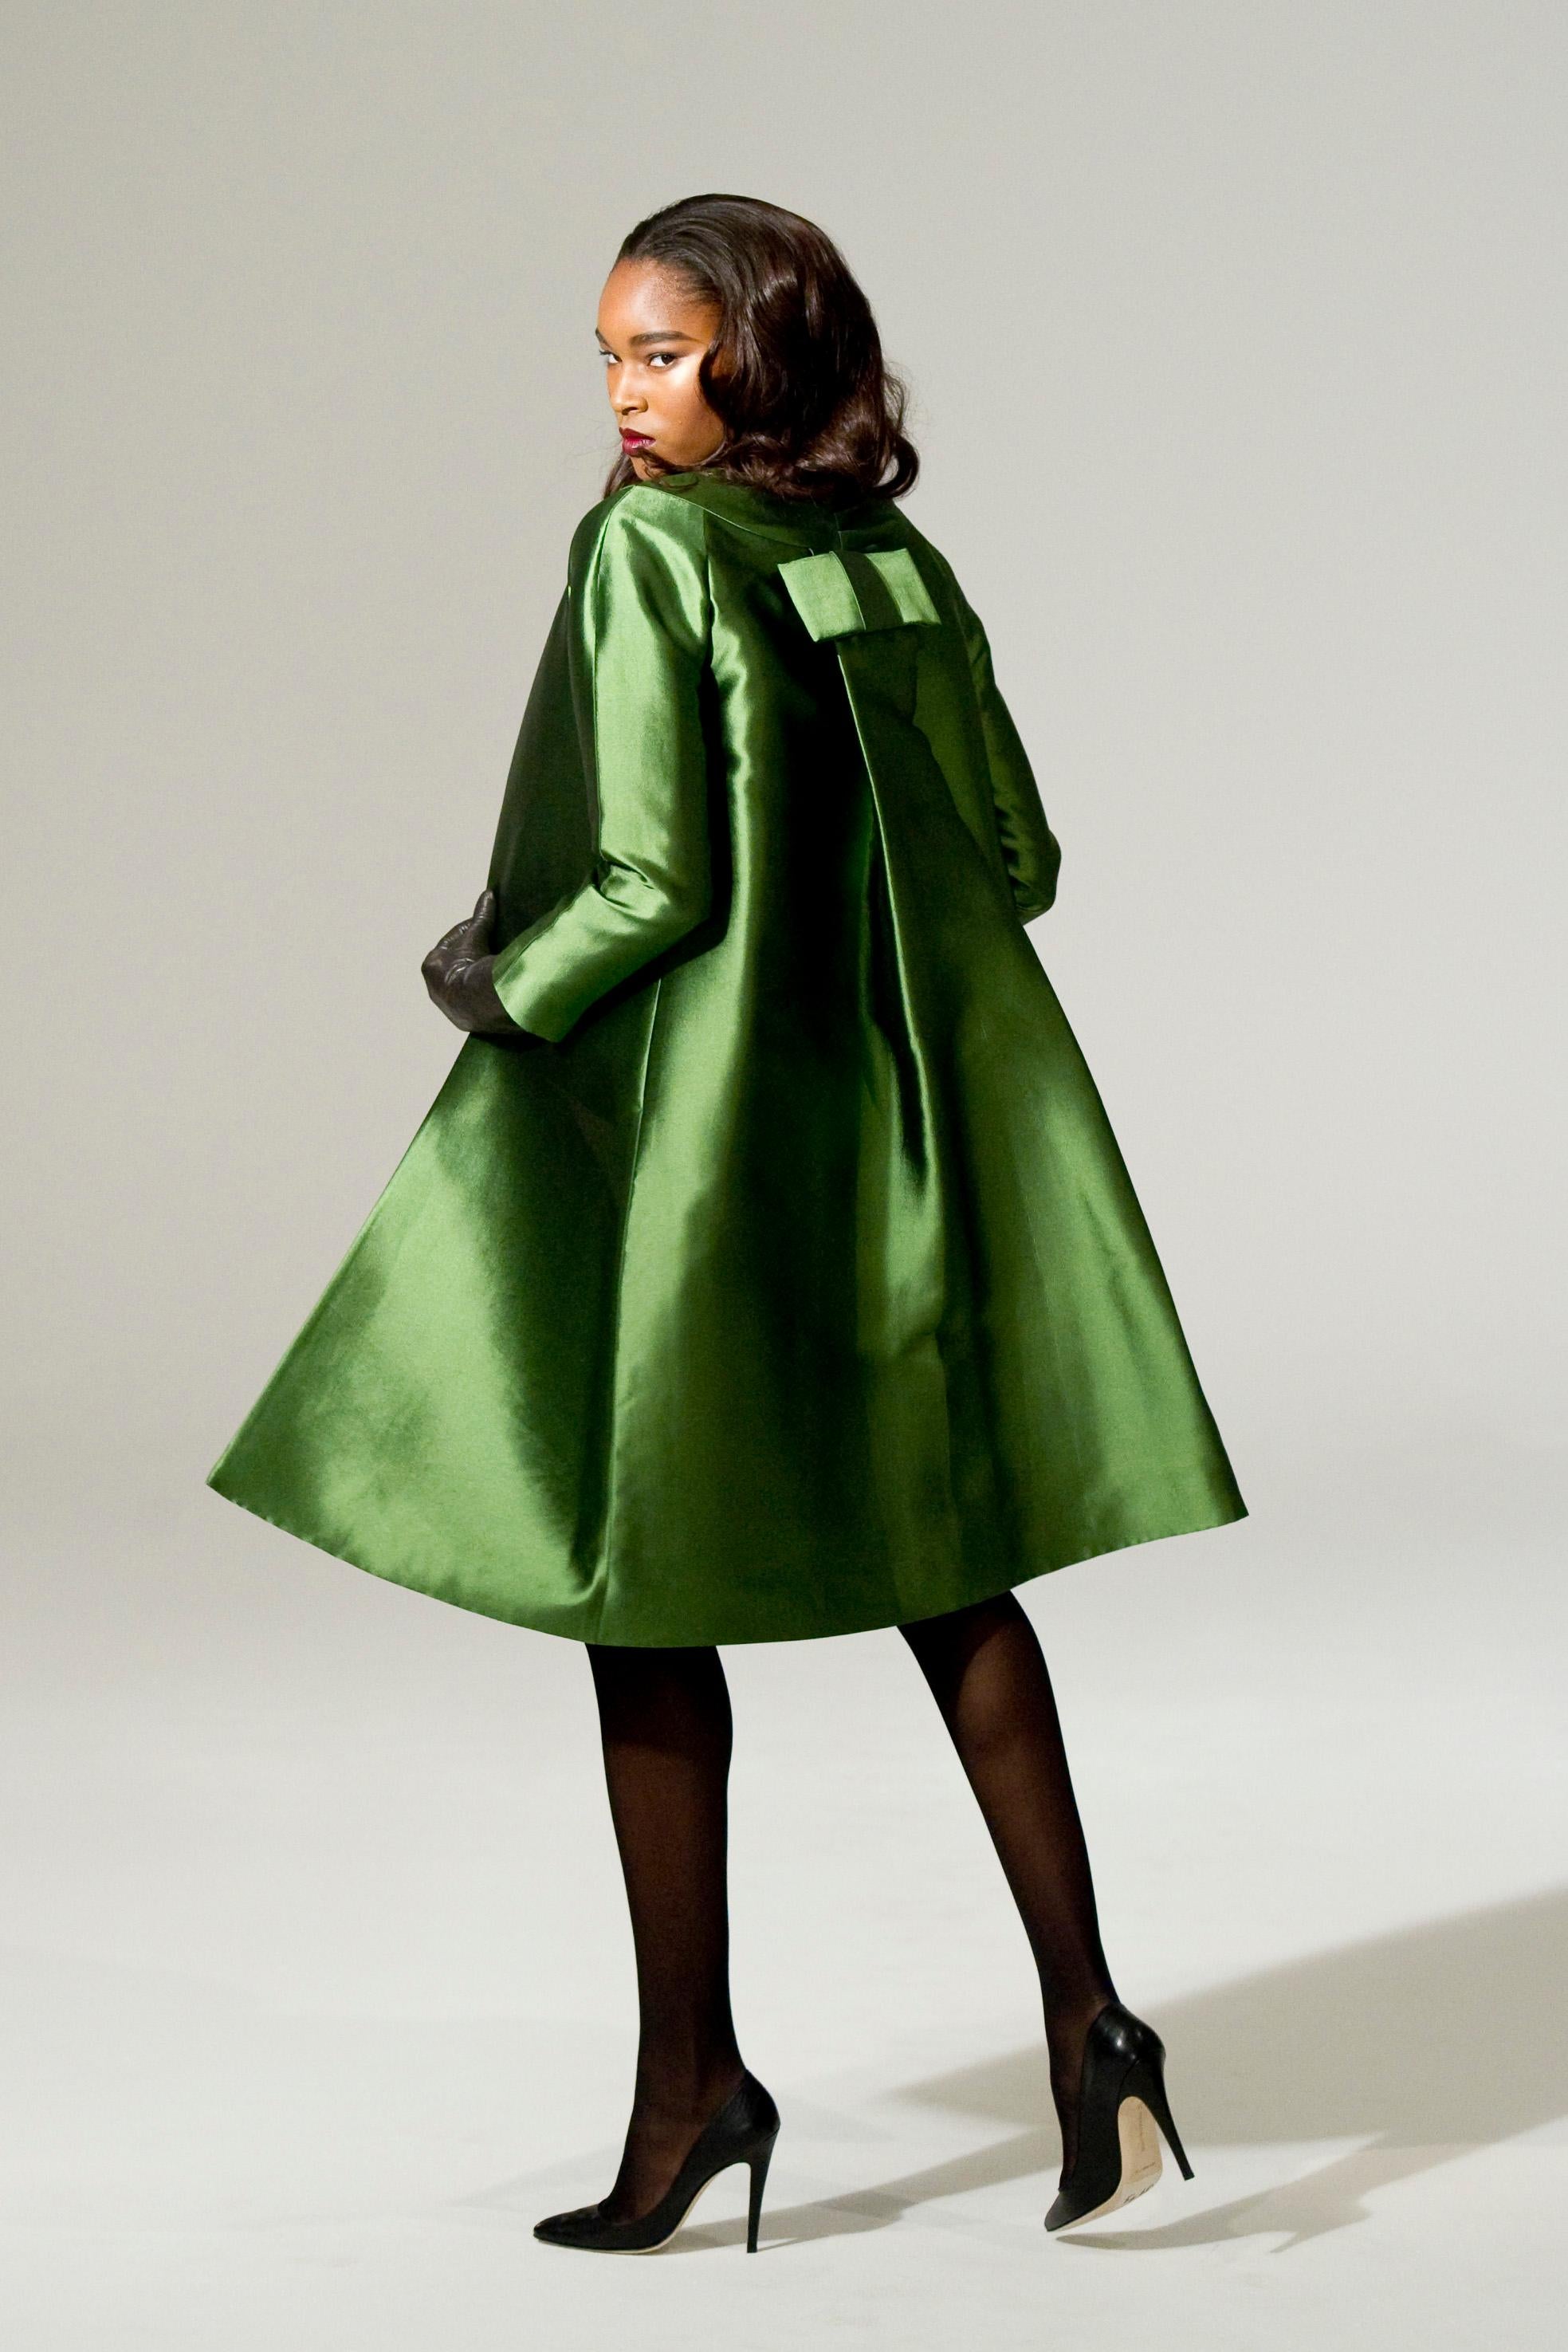  Vibrant Emerald Silk Opera Coat with Pleat Back and Charming Bow  4